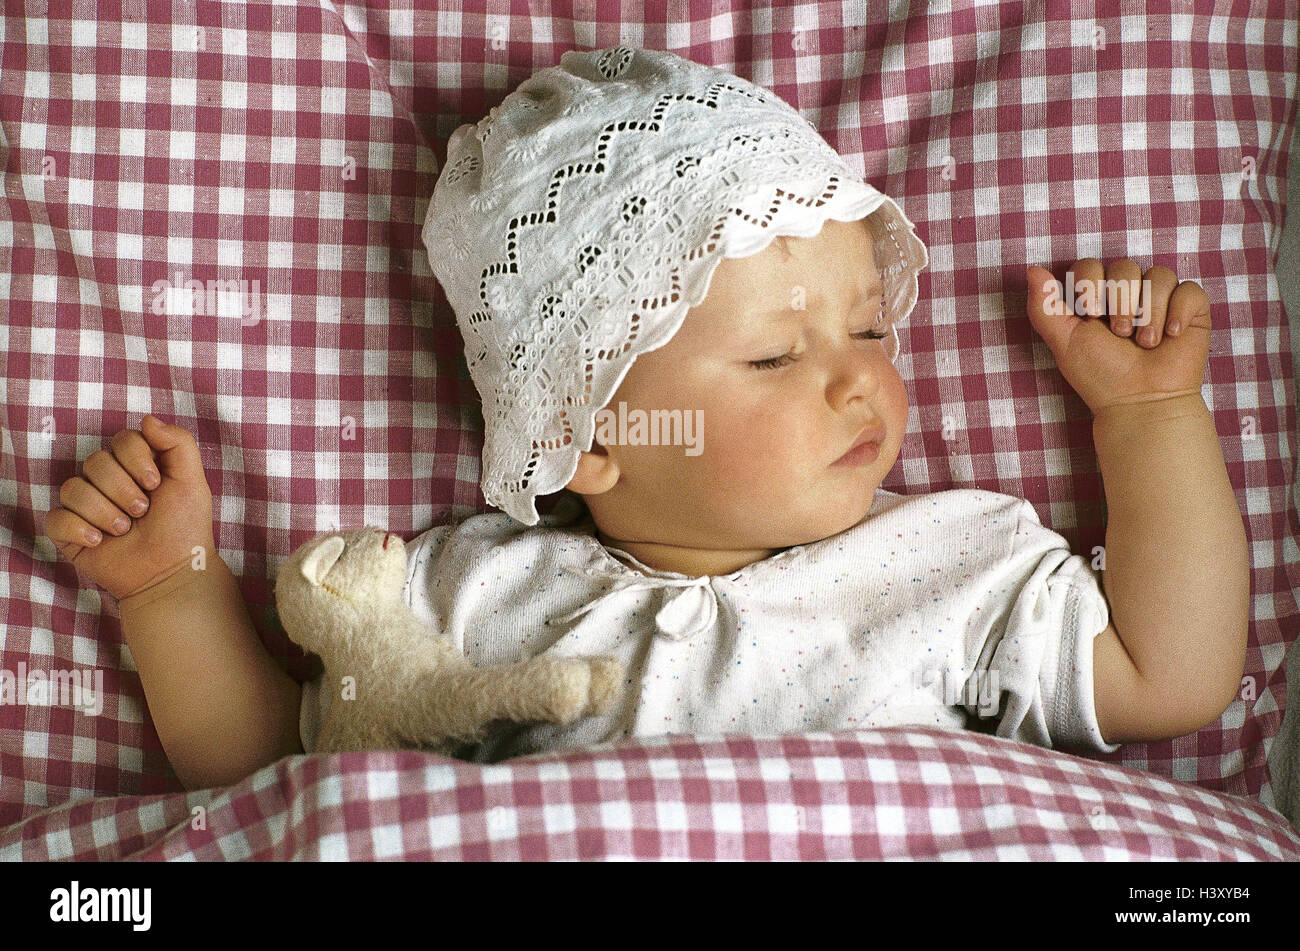 Bed, baby, cap, sleep, portrait, child, sleep, quiescence, rest, relax, after-lunch sleep, soft toy, bonnets, peacefully, innocently, heat, security Stock Photo